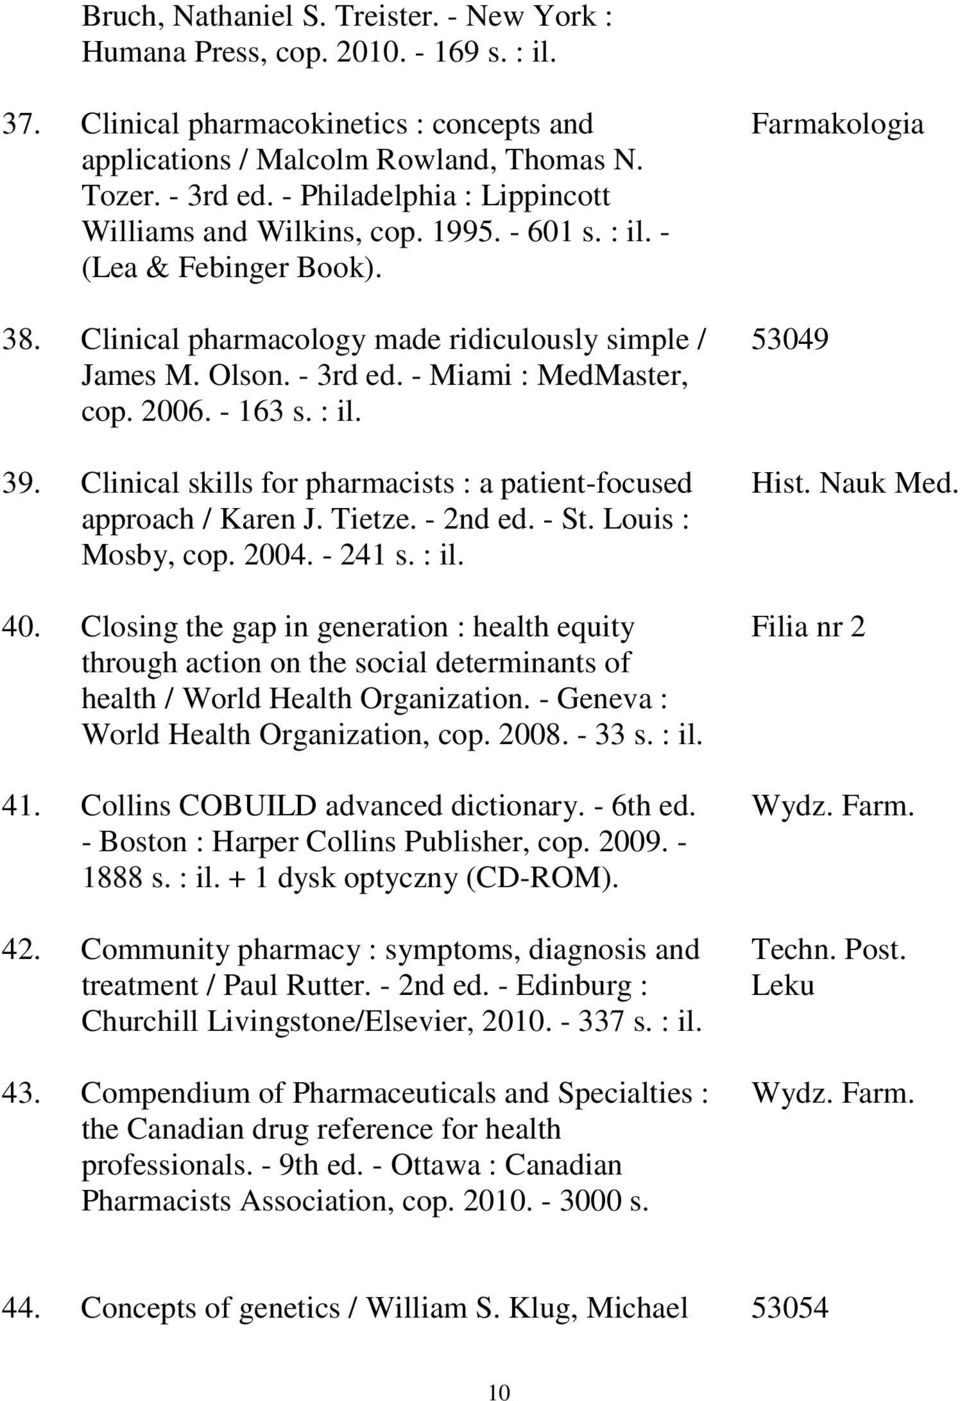 - Miami : MedMaster, cop. 2006. - 163 s. : il. 39. Clinical skills for pharmacists : a patient-focused approach / Karen J. Tietze. - 2nd ed. - St. Louis : Mosby, cop. 2004. - 241 s. : il. 40.